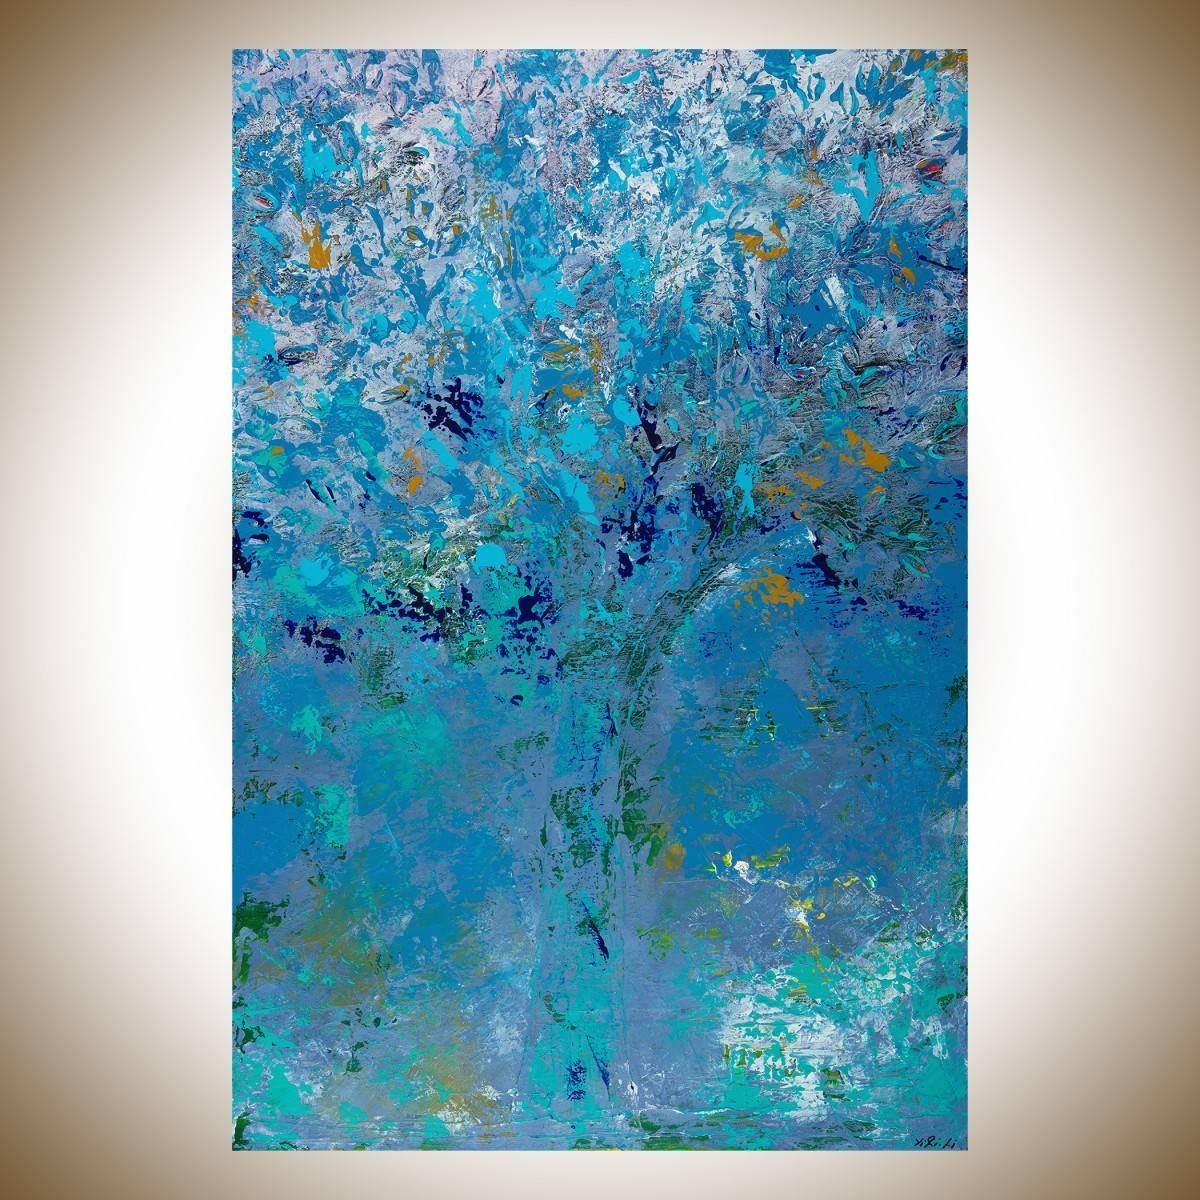 First Snowfallqiqigallery 36"x24" Original Modern Contemporary Throughout Recent Turquoise And Black Wall Art (View 4 of 20)